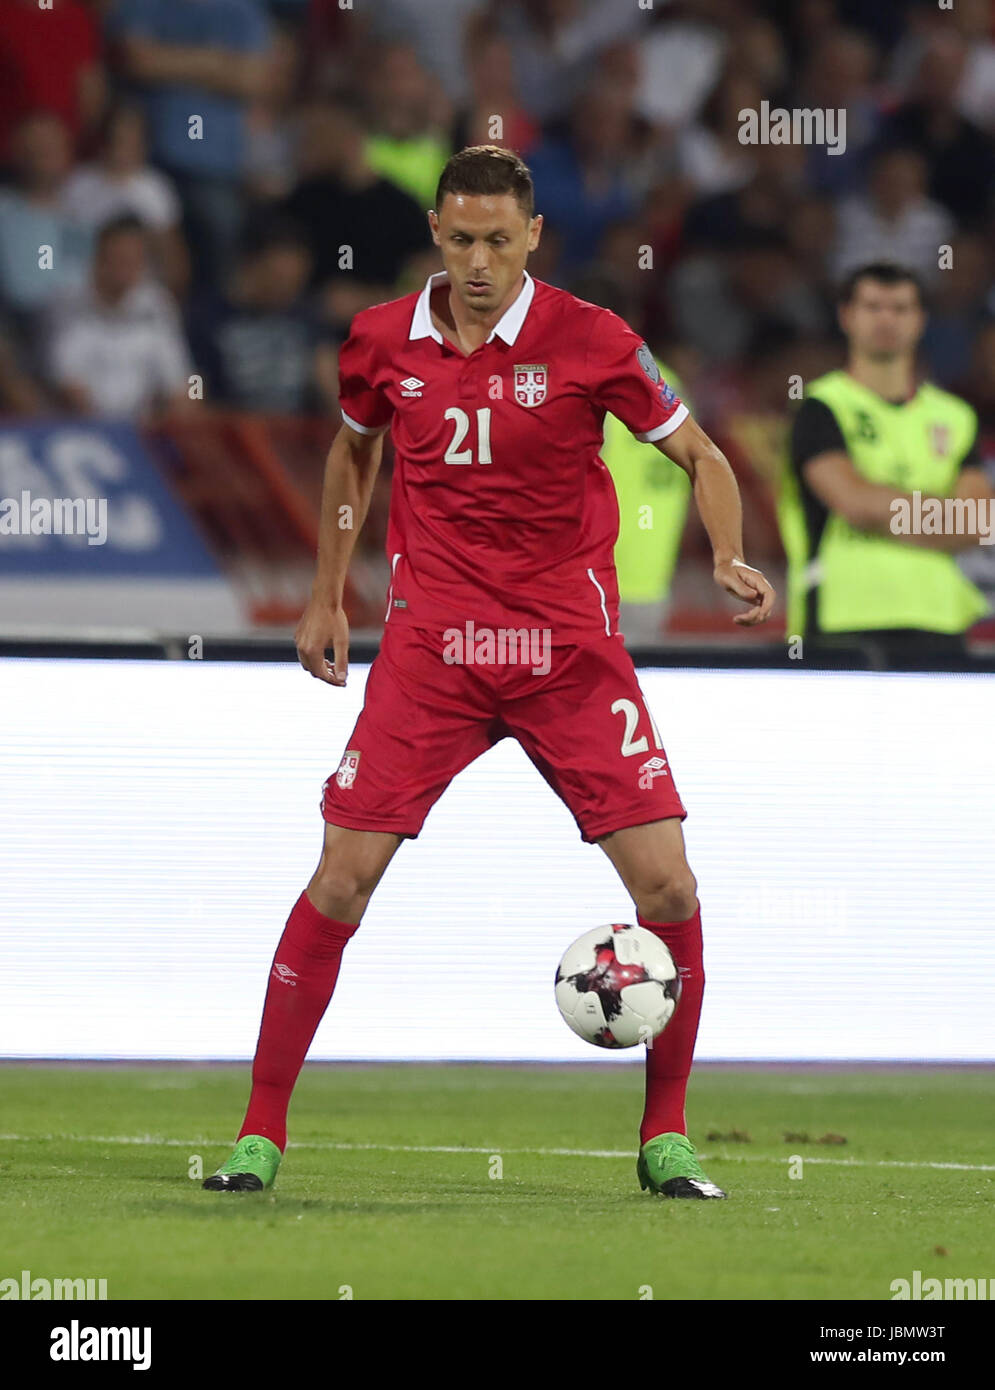 Serbia's Nemanja Matic during the 2018 FIFA World Cup Qualifying, Group D match at the Rajko Mitic Stadium, Belgrade. PRESS ASSOCIATION Photo. Picture date: Sunday June 11, 2017. See PA story soccer Serbia. Photo credit should read: Simon Cooper/PA Wire. RESTRICTIONS: Editorial use only, No commercial use without prior permission. Stock Photo